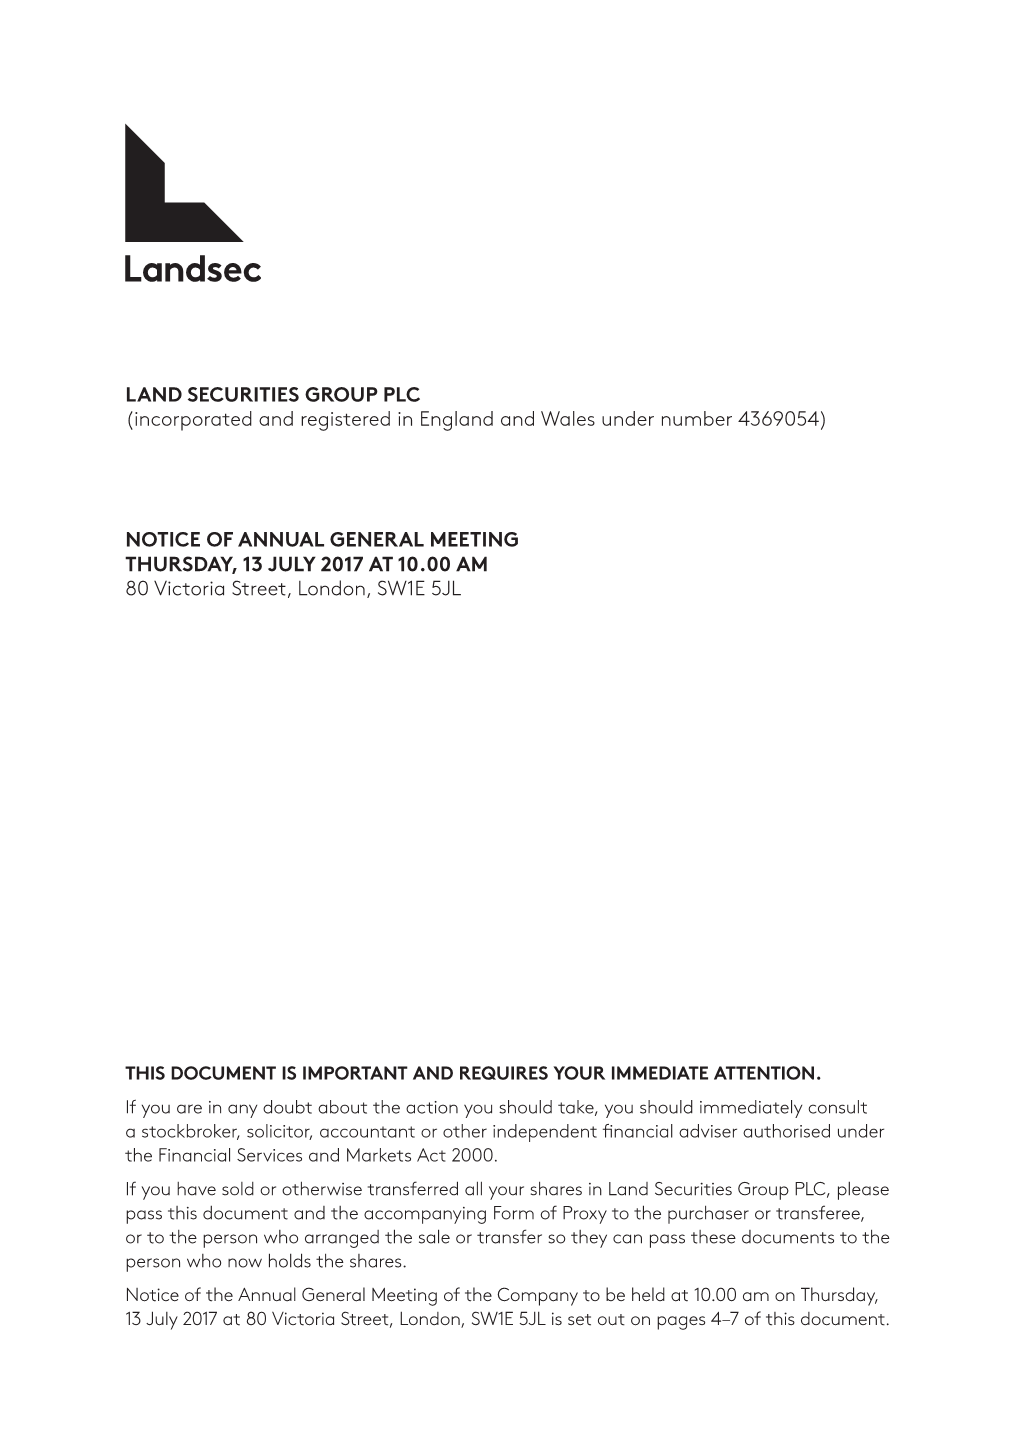 LAND SECURITIES GROUP PLC (Incorporated and Registered in England and Wales Under Number 4369054)